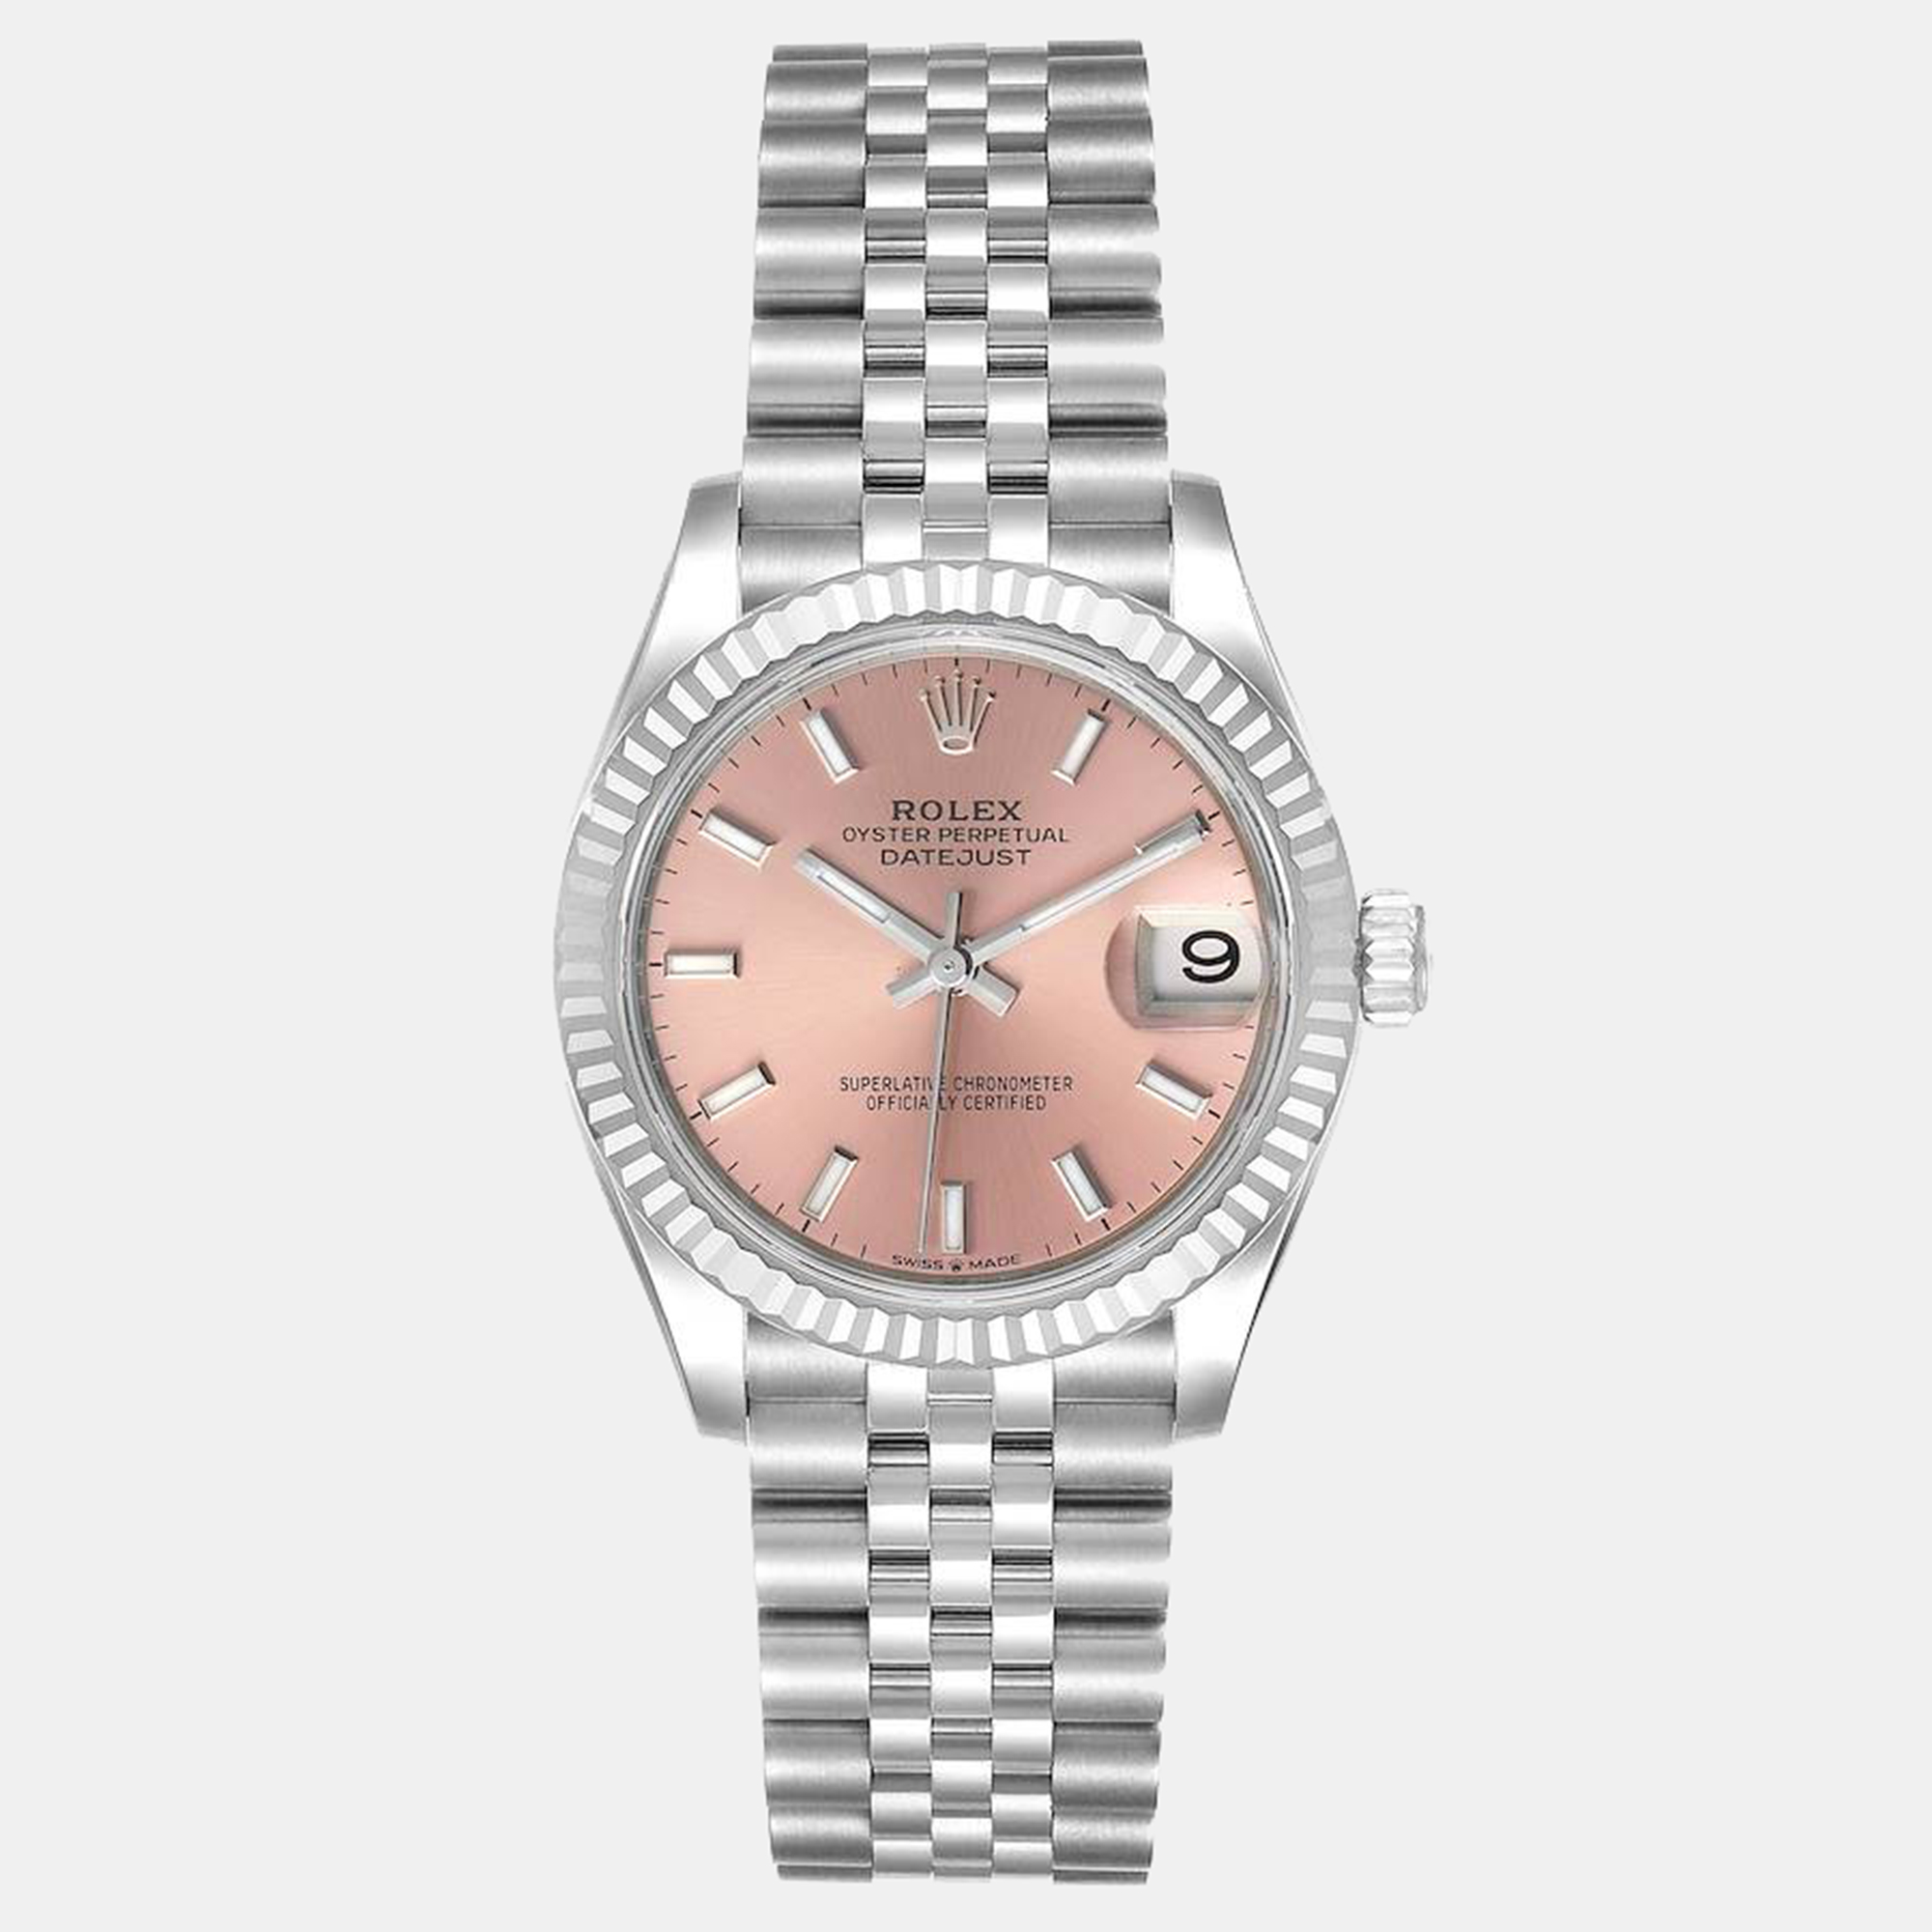 Rolex pink 18k white gold and stainless steel datejust 278274 women's wristwatch 31 mm